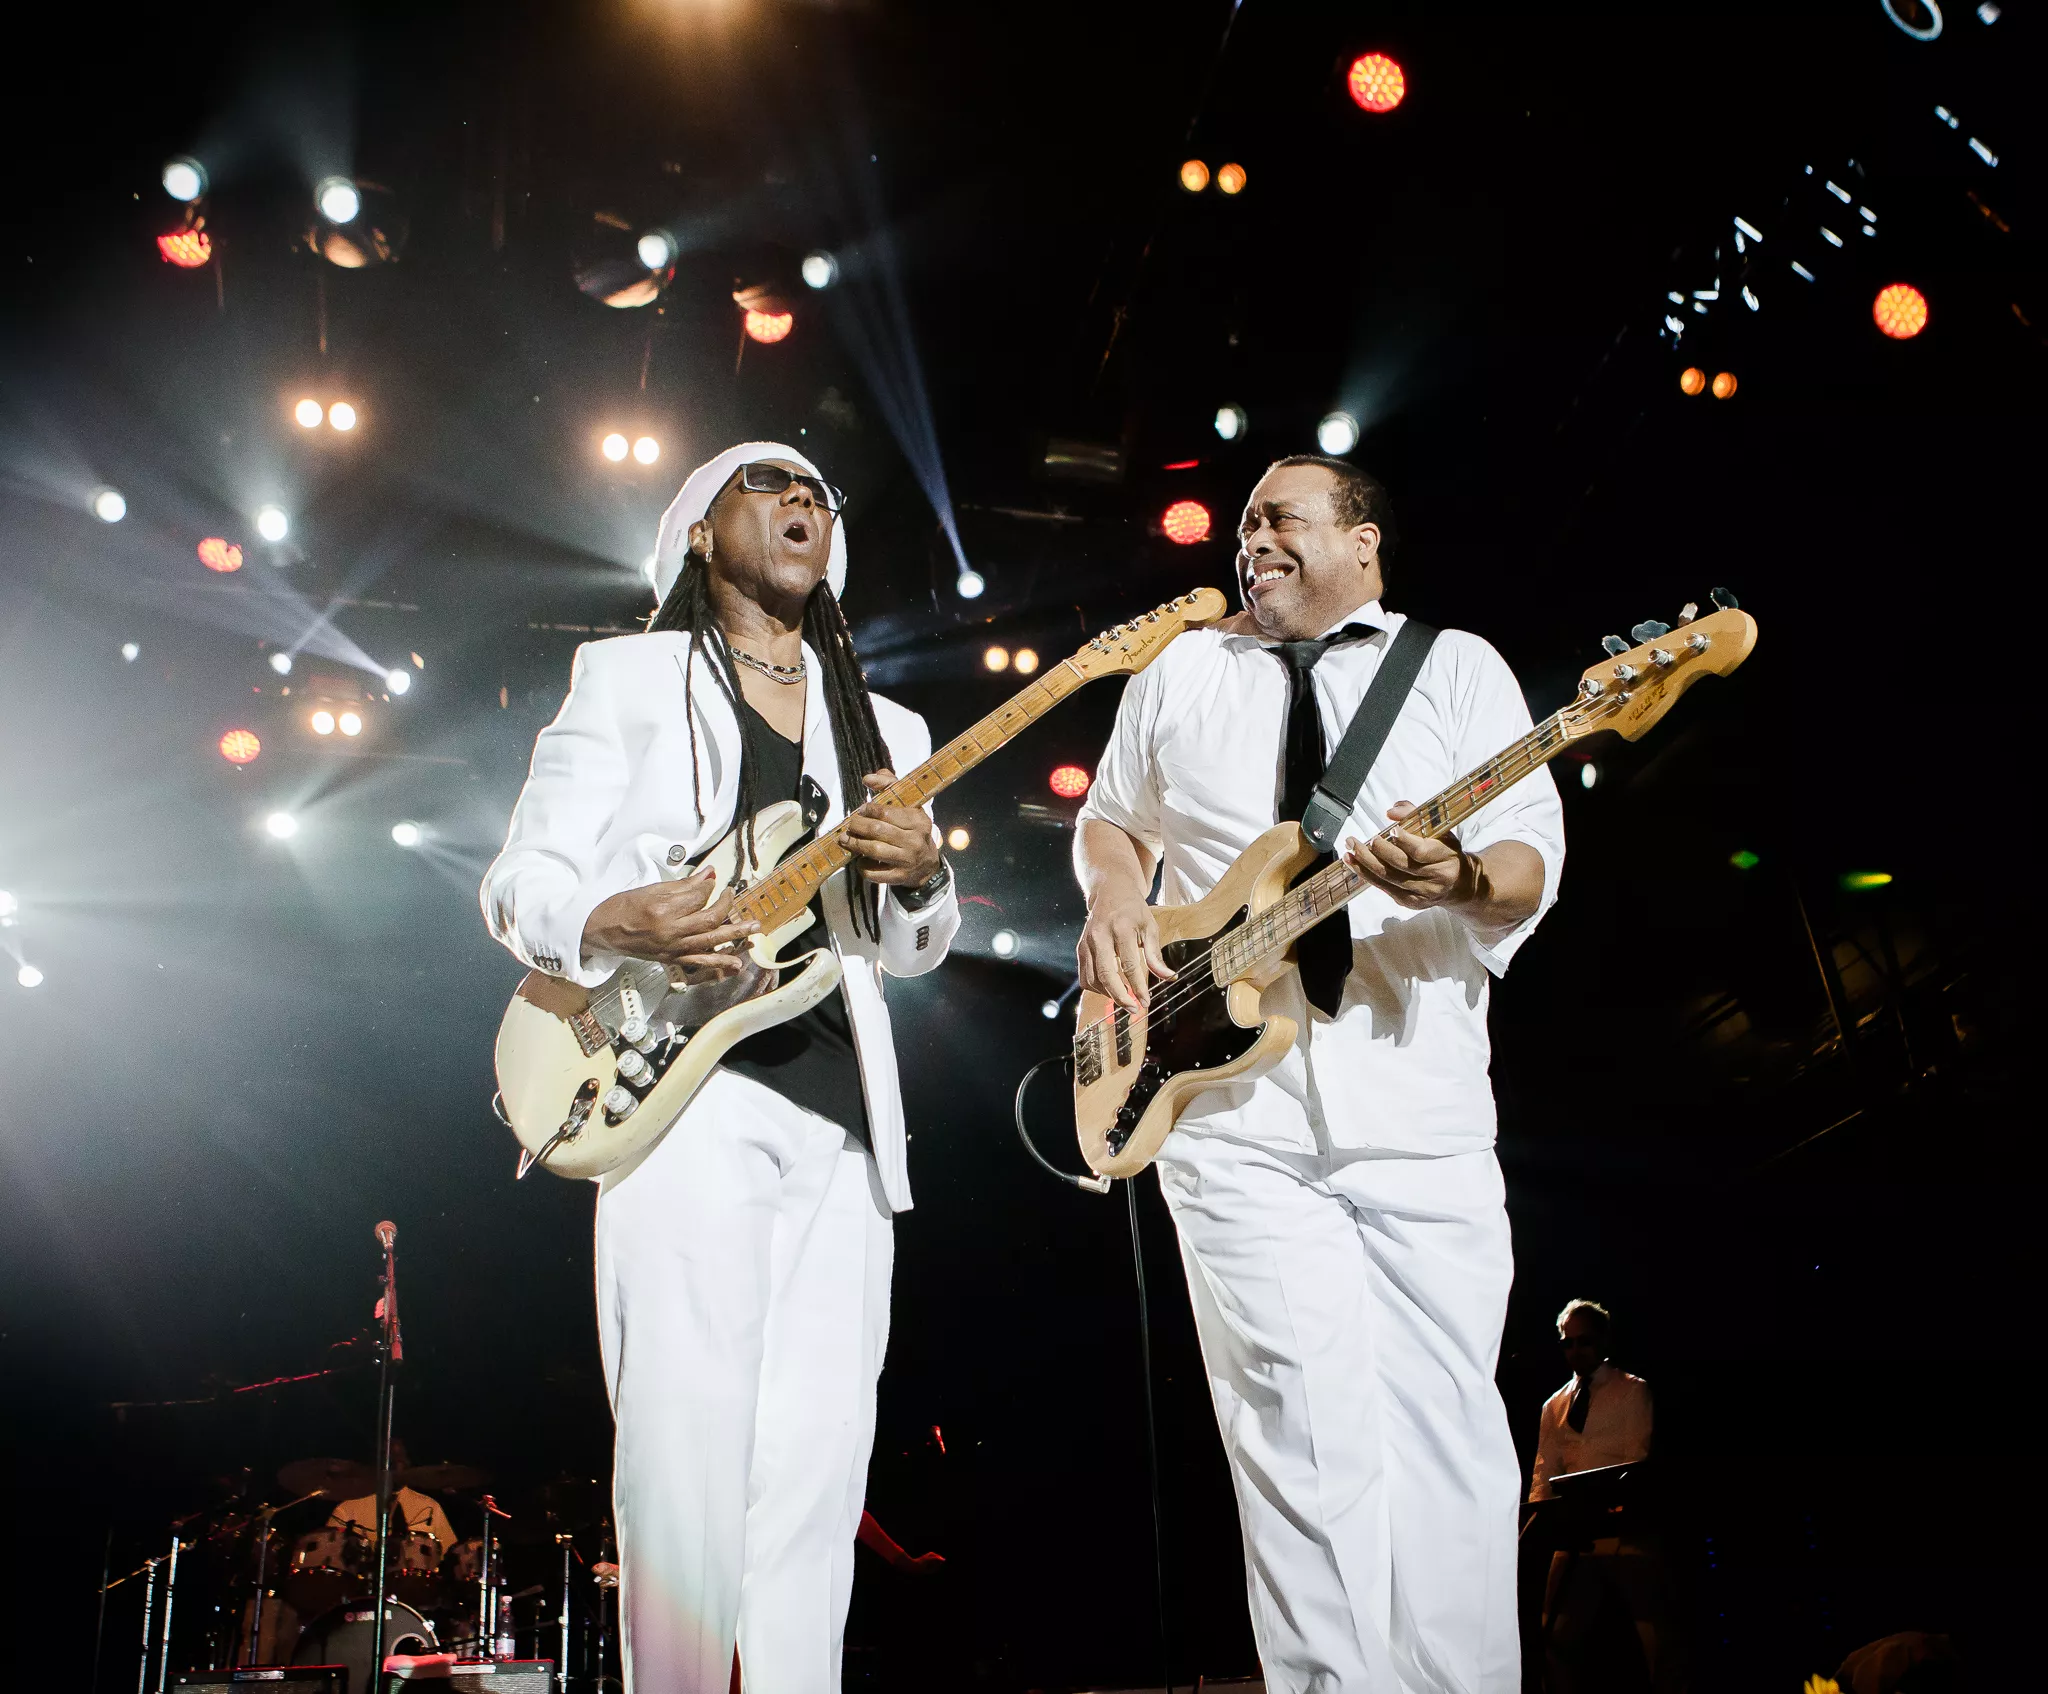 Chic featuring Nile Rodgers: Smukfest, Bøgescenerne